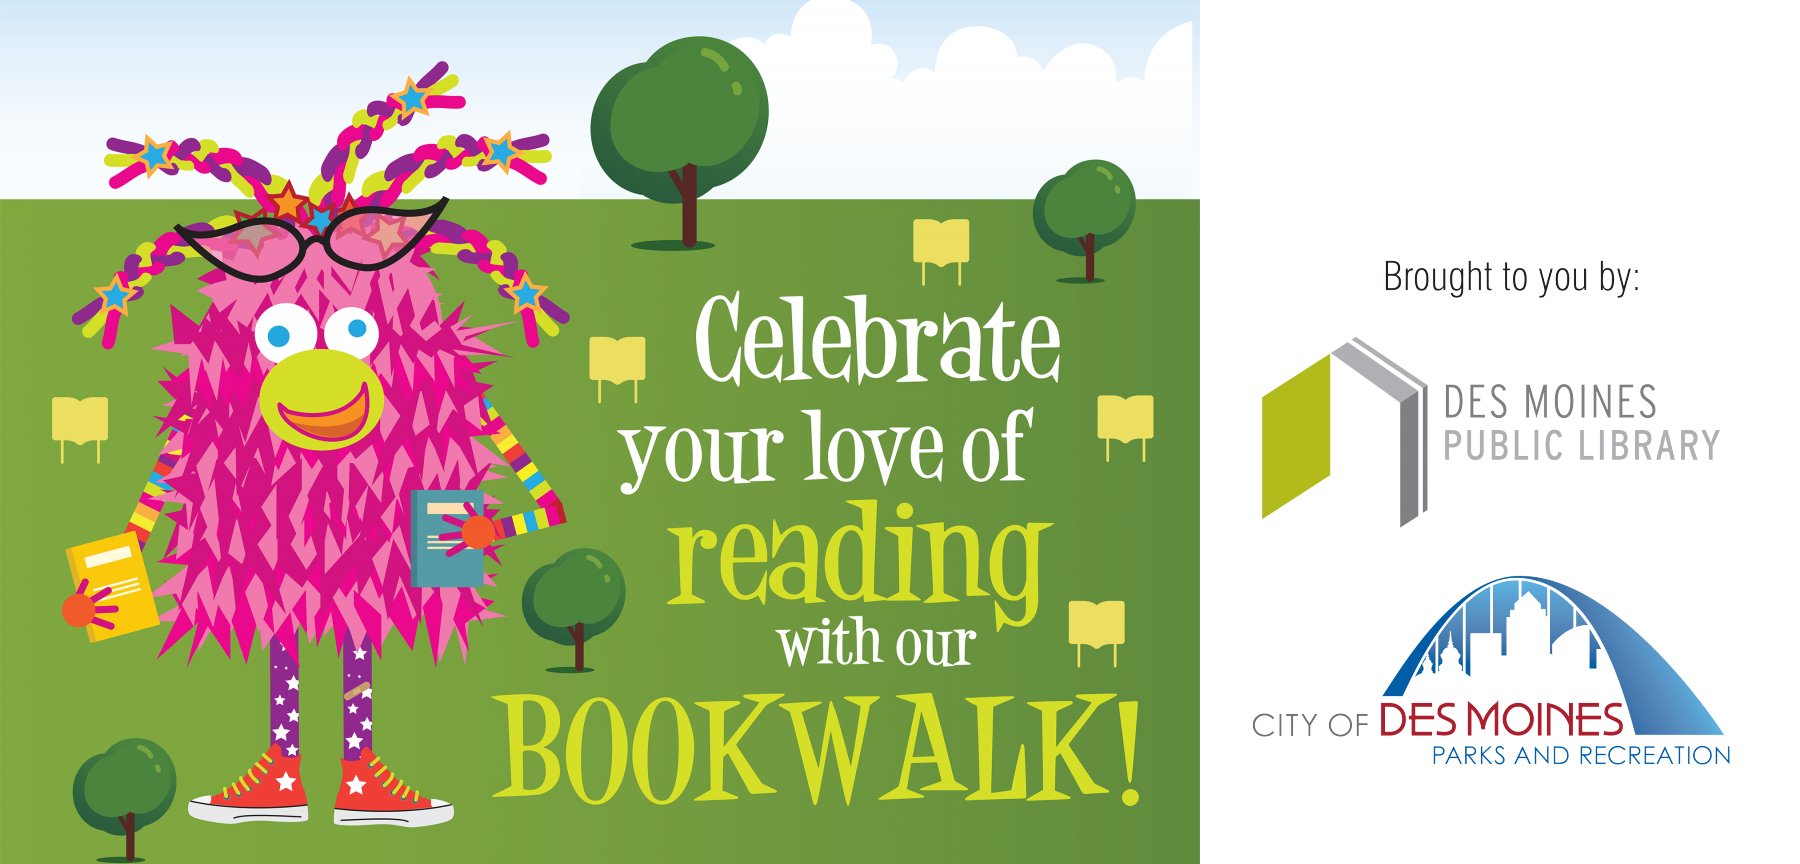 Bookwalk header image that reads, "Celebrate your love of reading with our Bookwalk!" brought to you by the city of Des Moines and Des Moines Public Library